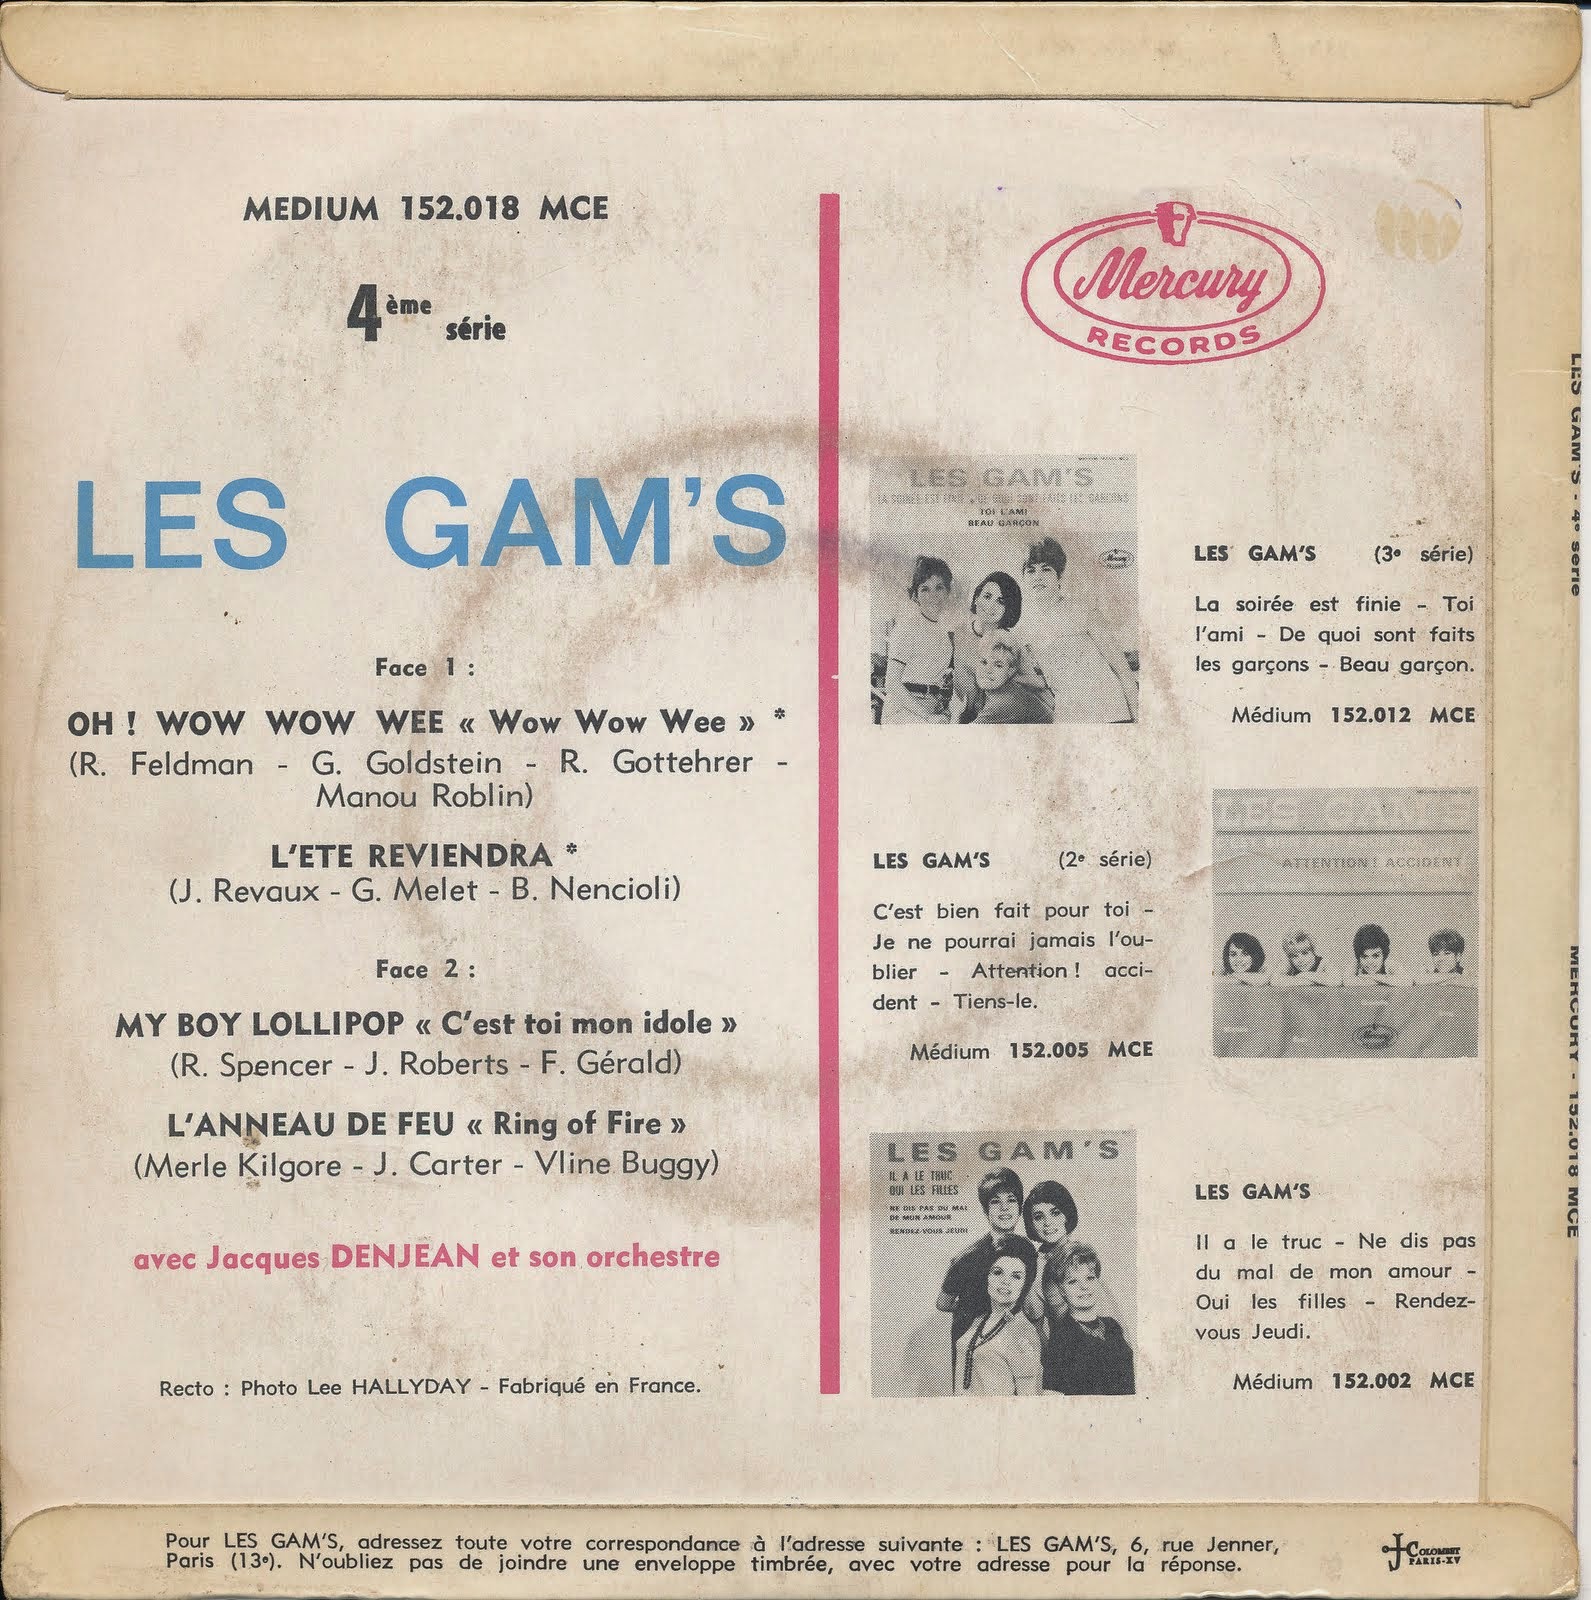 Les Gam's - EP Collection